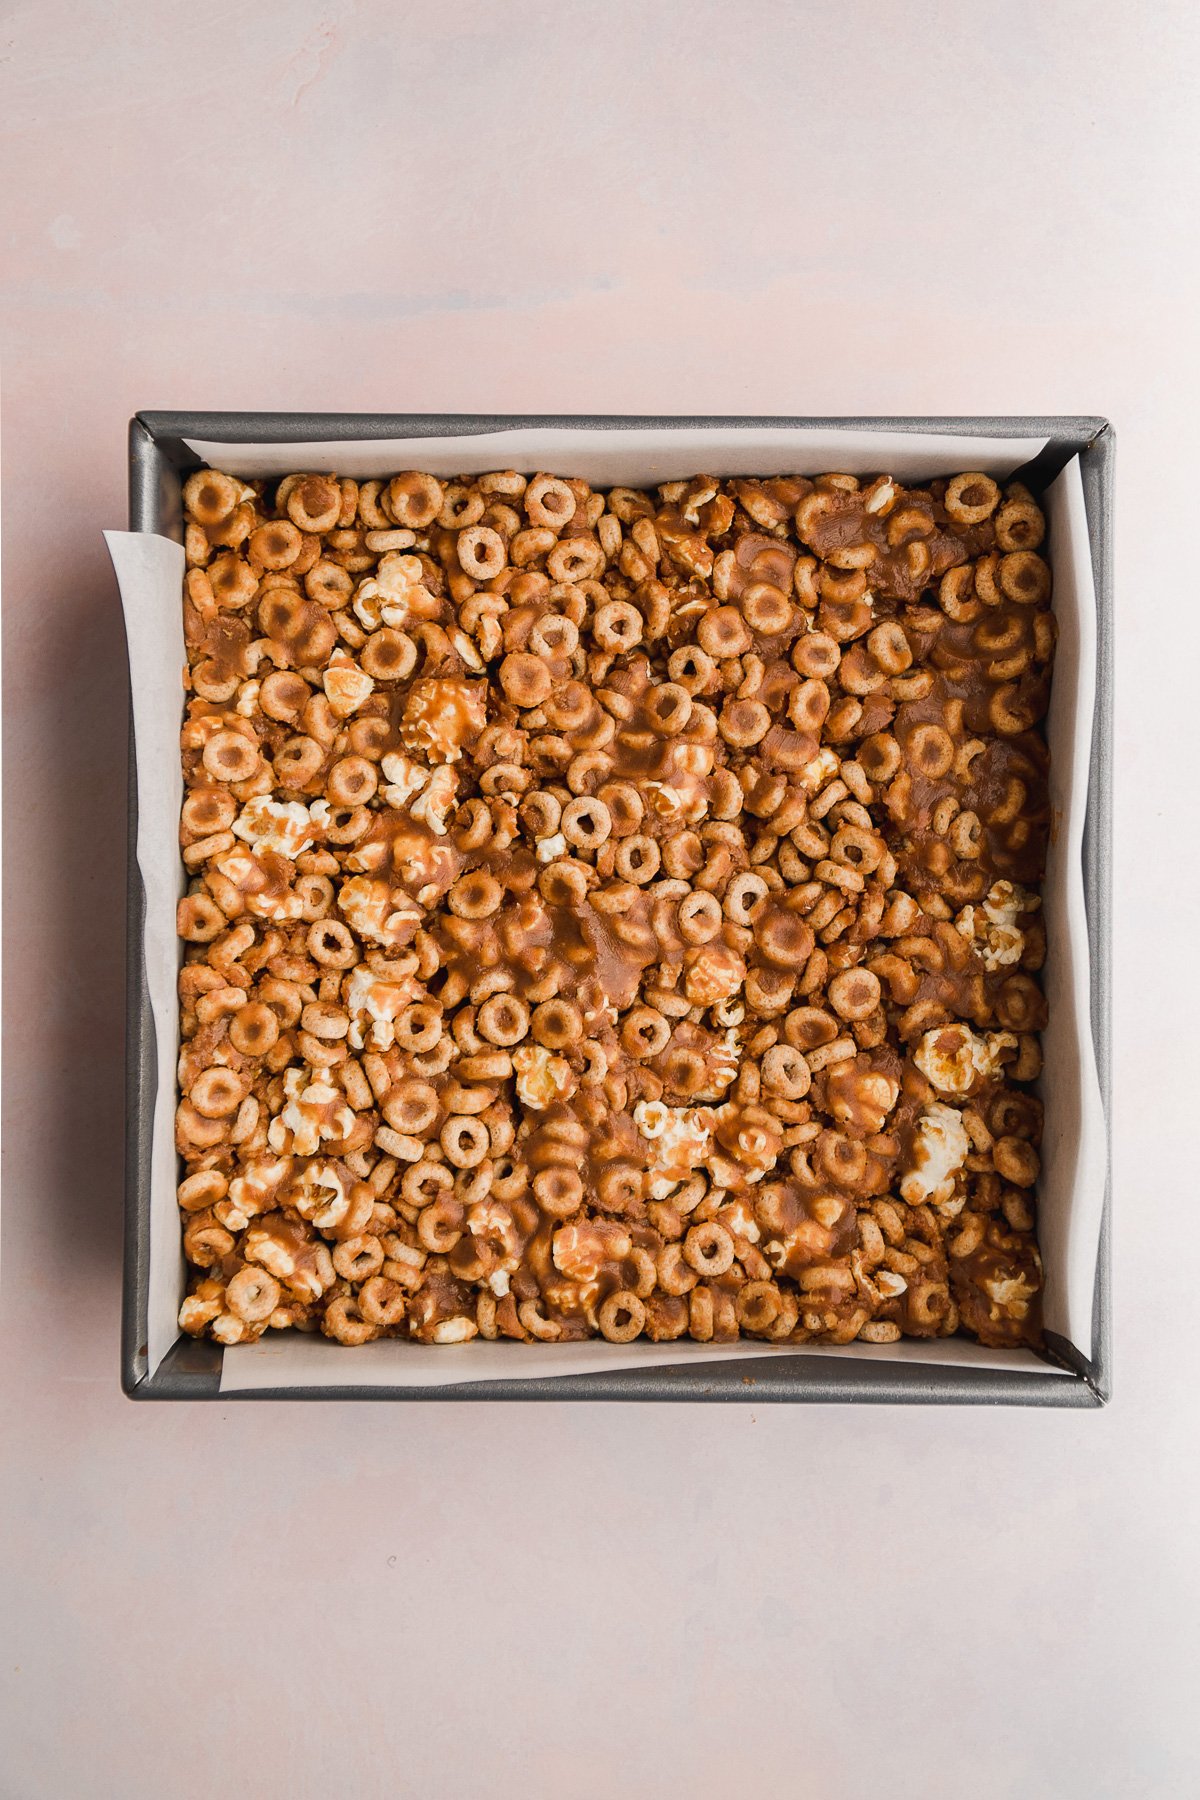 Square baking pan with peanut butter cheerio mixture pressed inside.